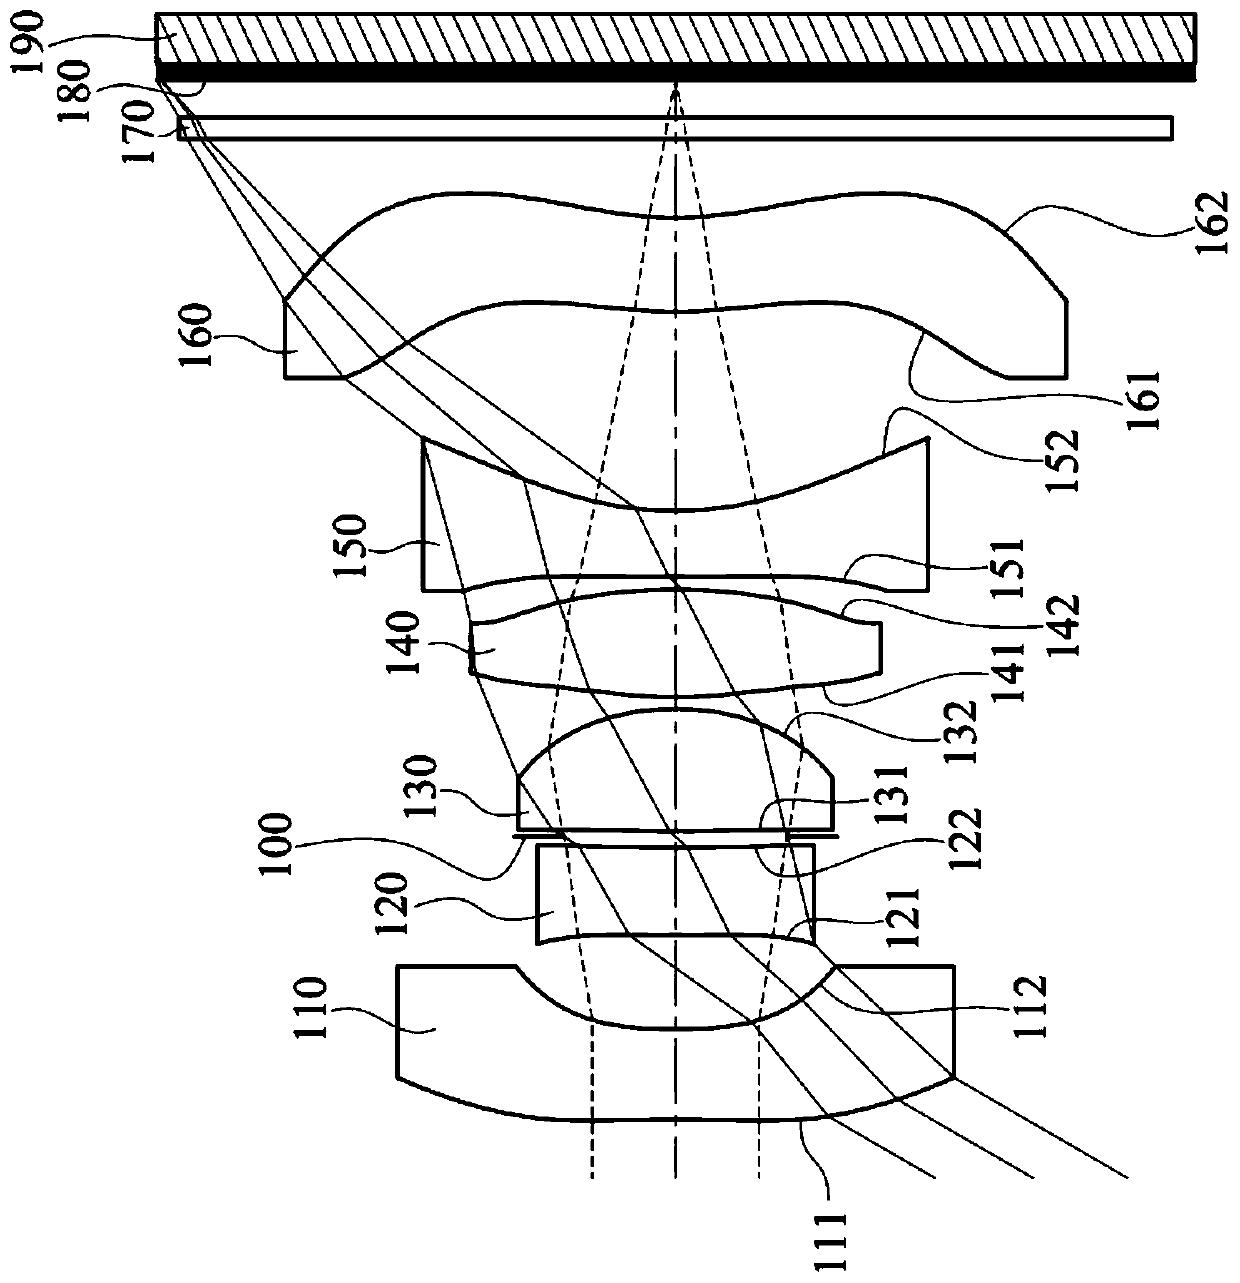 Image lens and image capturing device